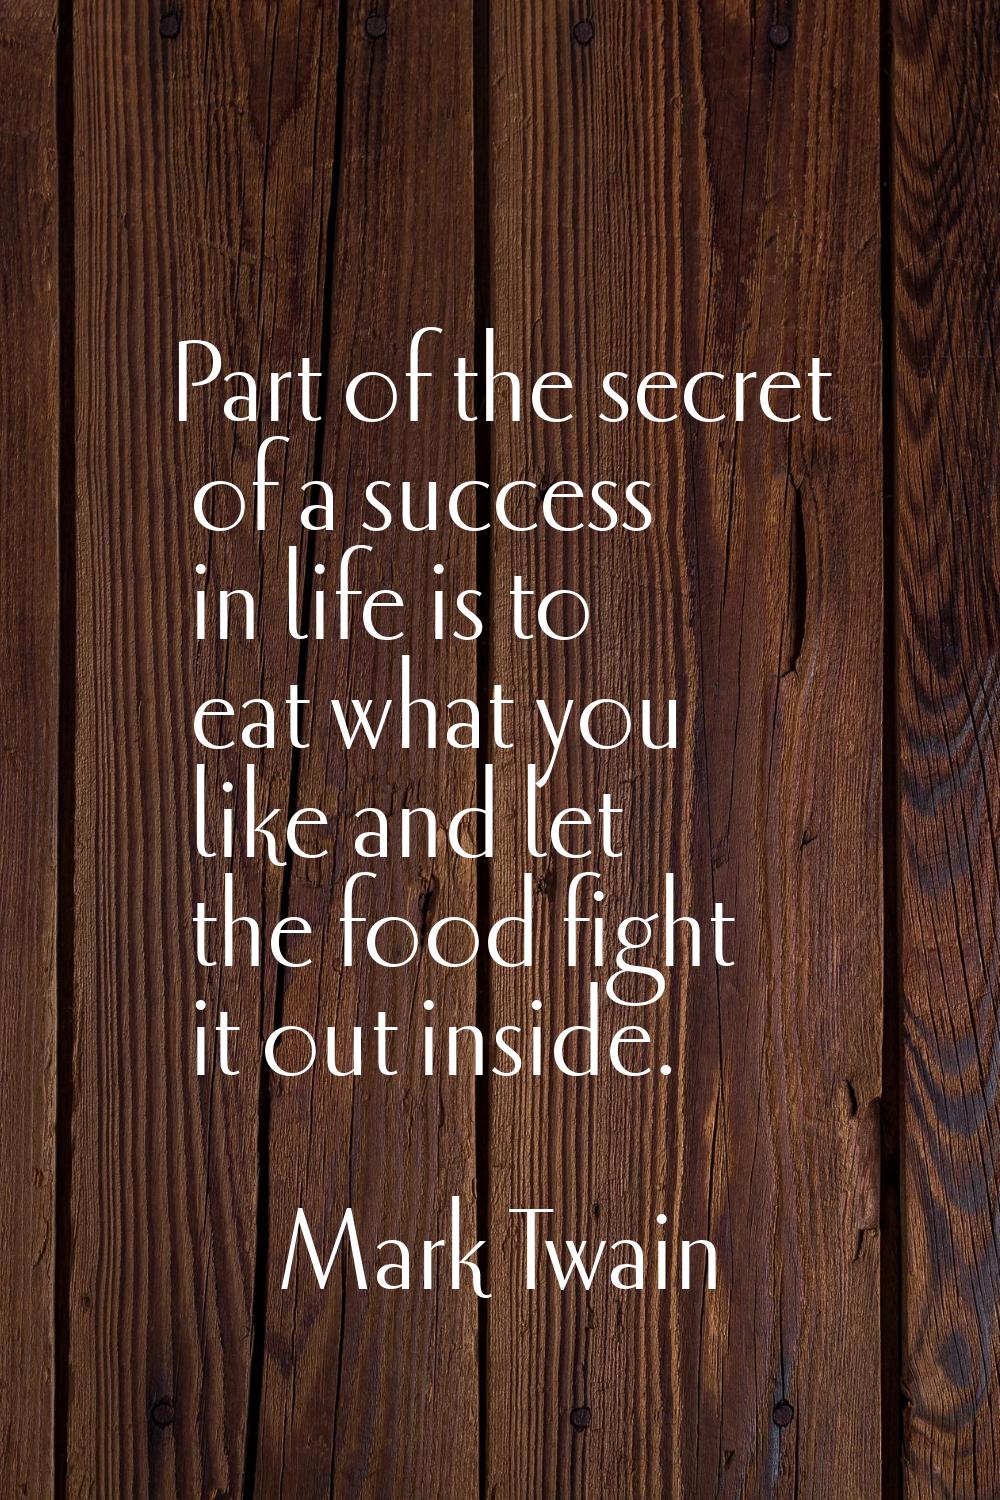 Part of the secret of a success in life is to eat what you like and let the food fight it out insid